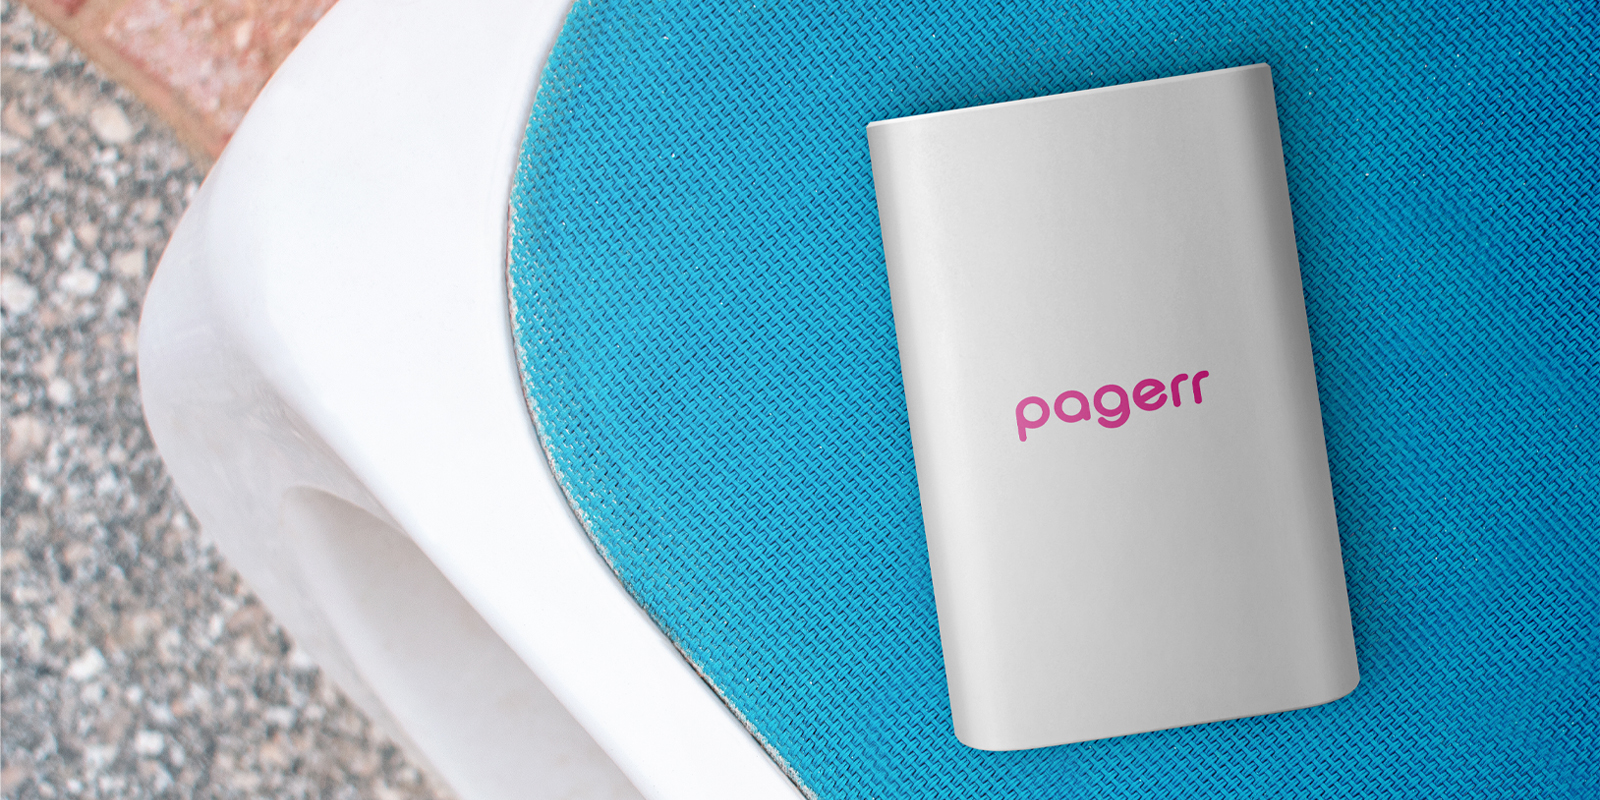 Chargers & power banks in Vilnius - Print with Pagerr